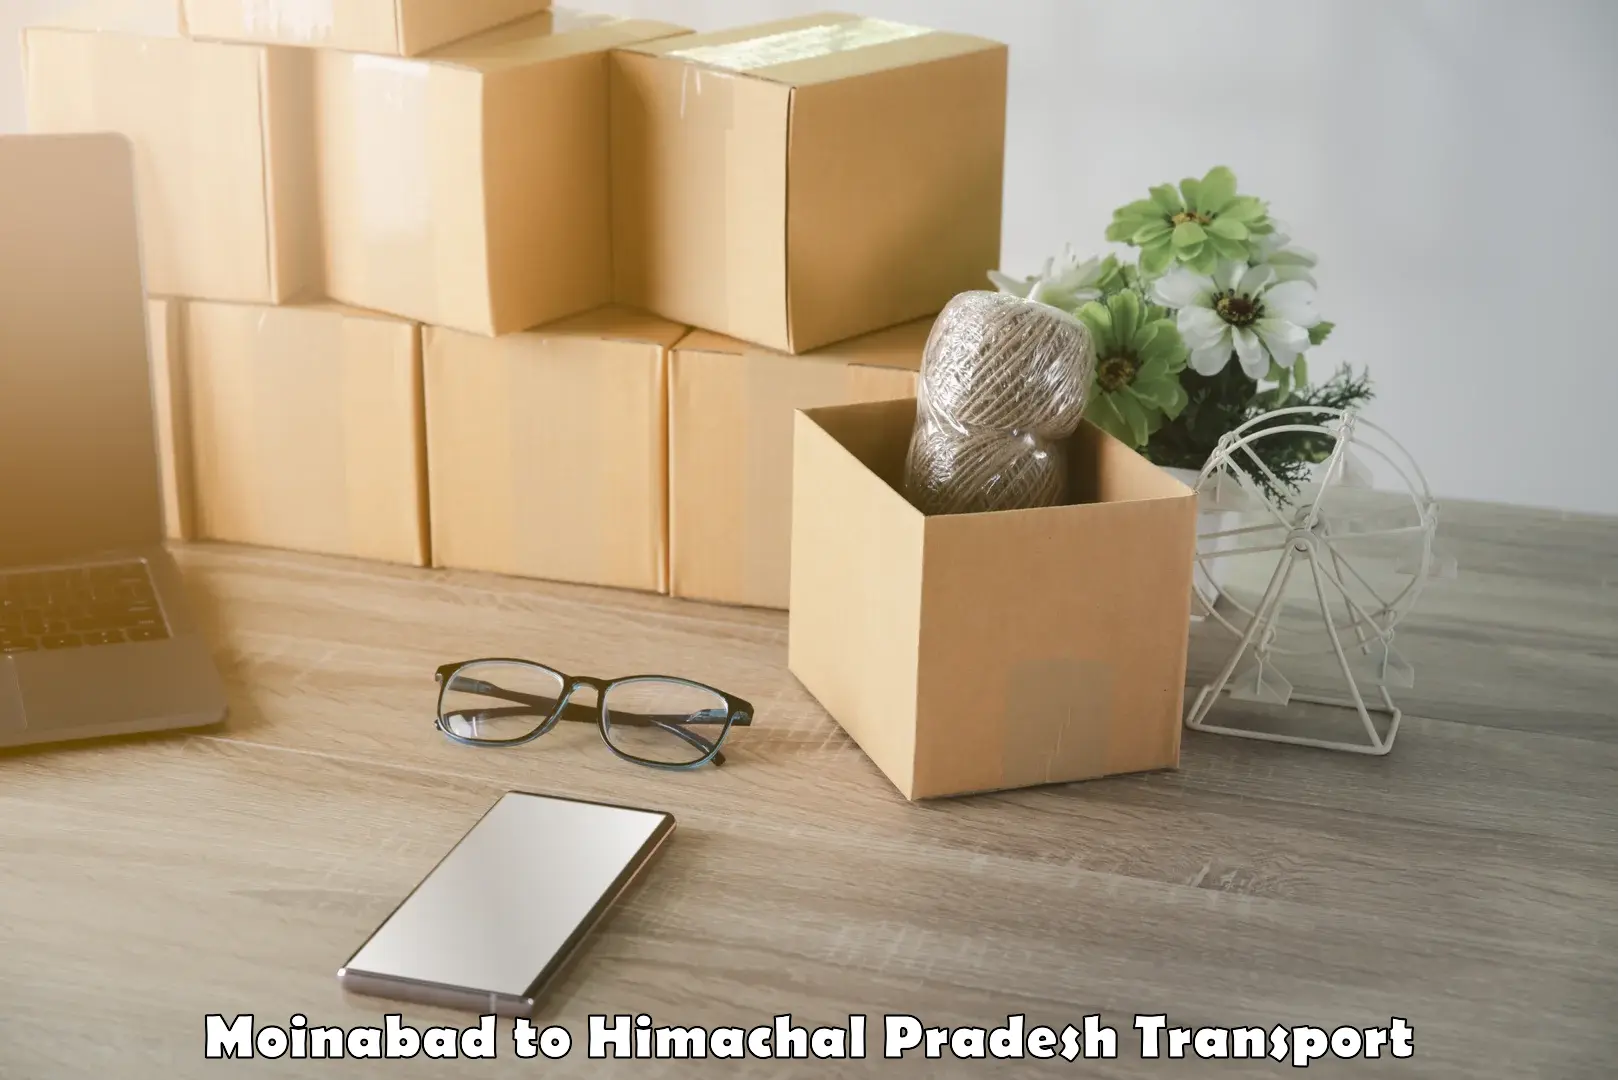 Transport in sharing Moinabad to Himachal Pradesh